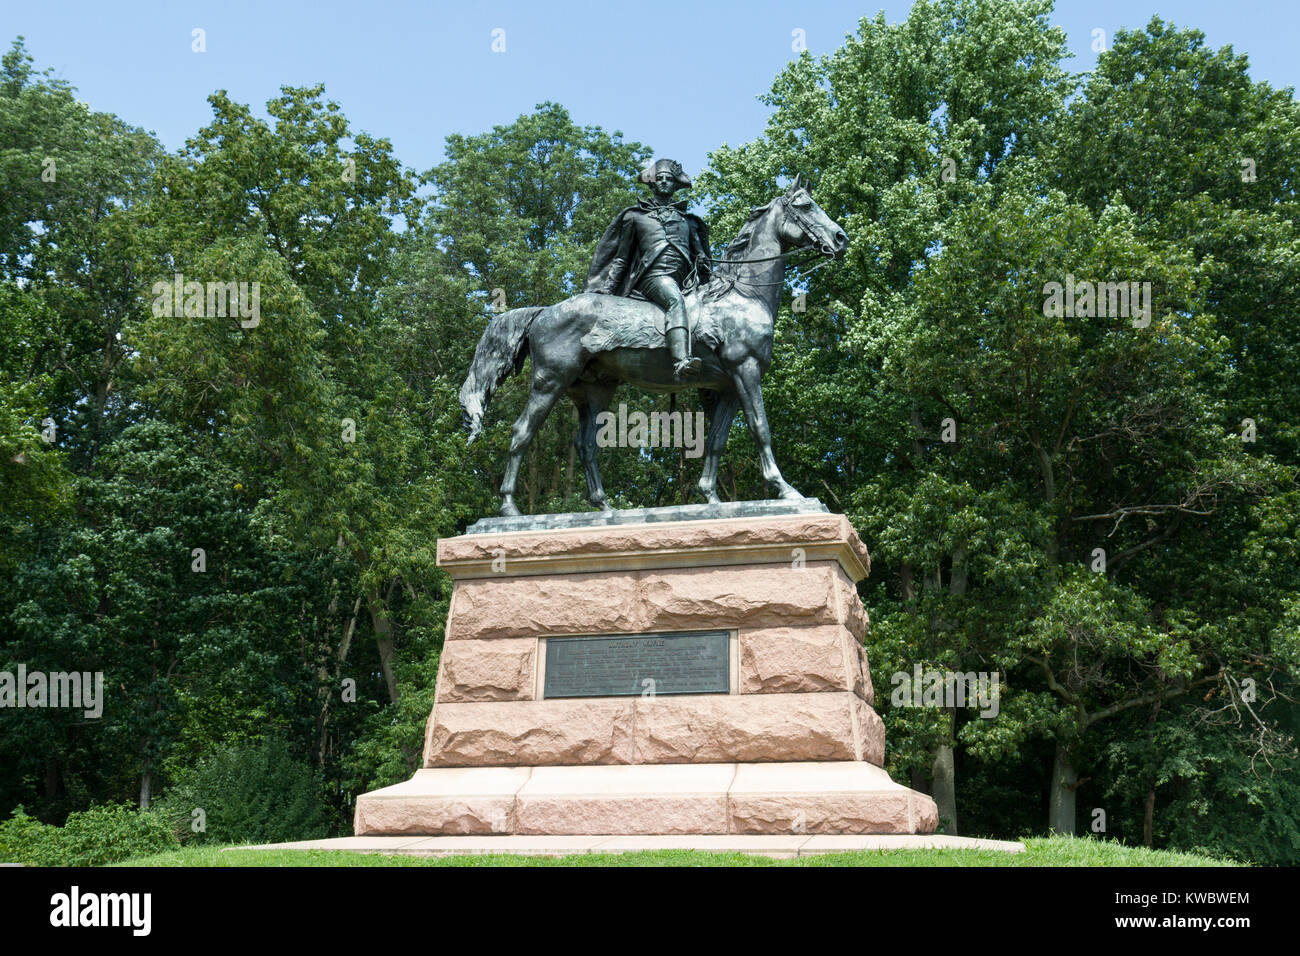 The General Anthony Wayne Monument, Valley Forge National Historical Park (U.S. National Park Service), Valley Forge, Pennsylvania, United States. Stock Photo